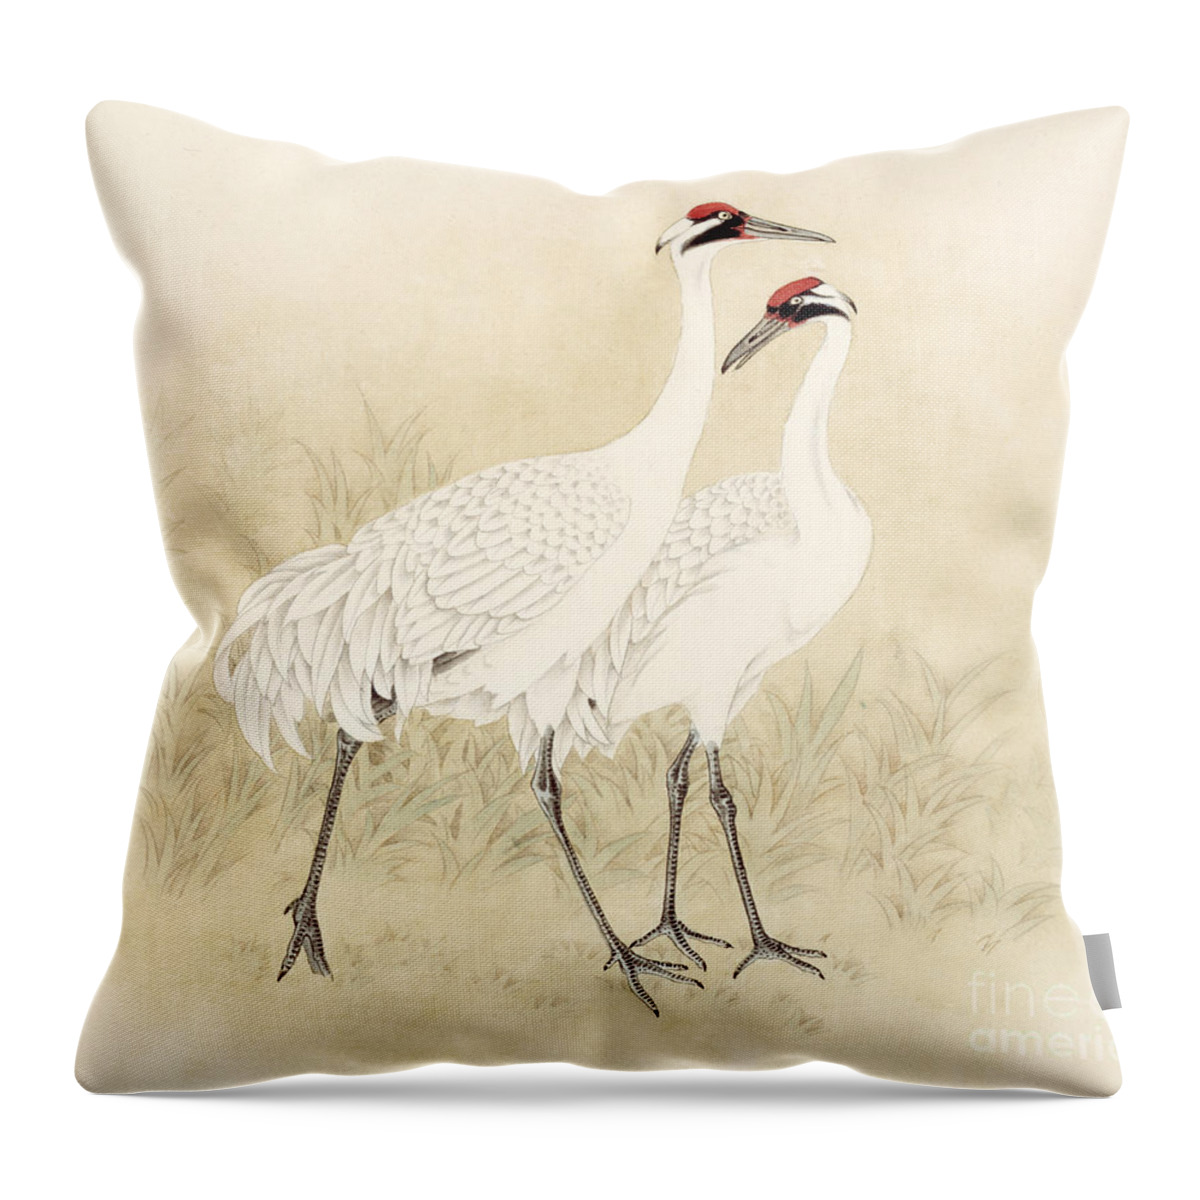 Zhan Gengxi Throw Pillow featuring the painting Two Whooping Cranes by Zhan Gengxi